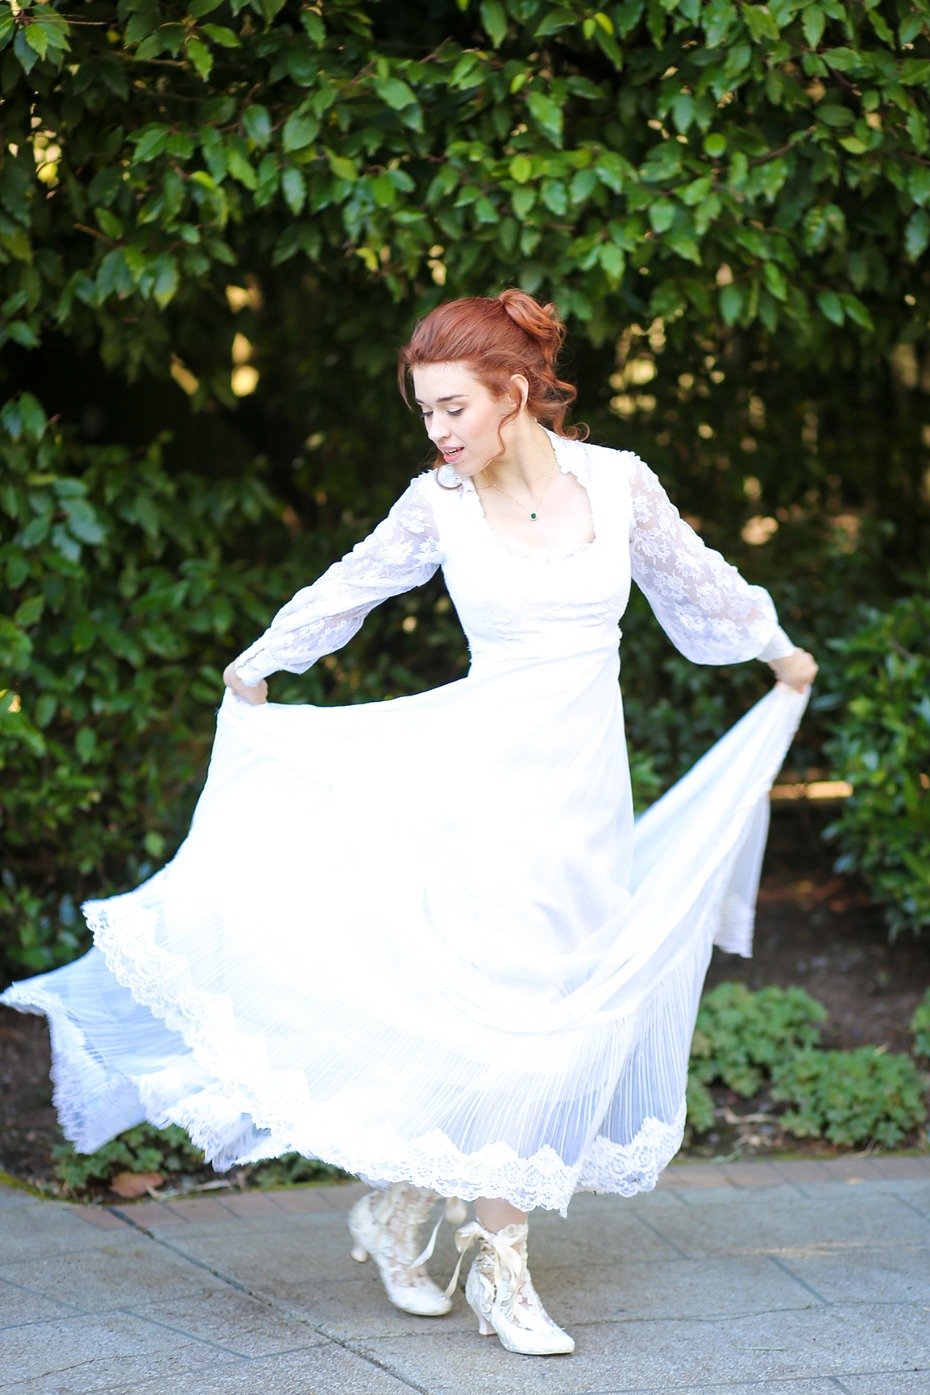 Vintage wedding dress and shoes